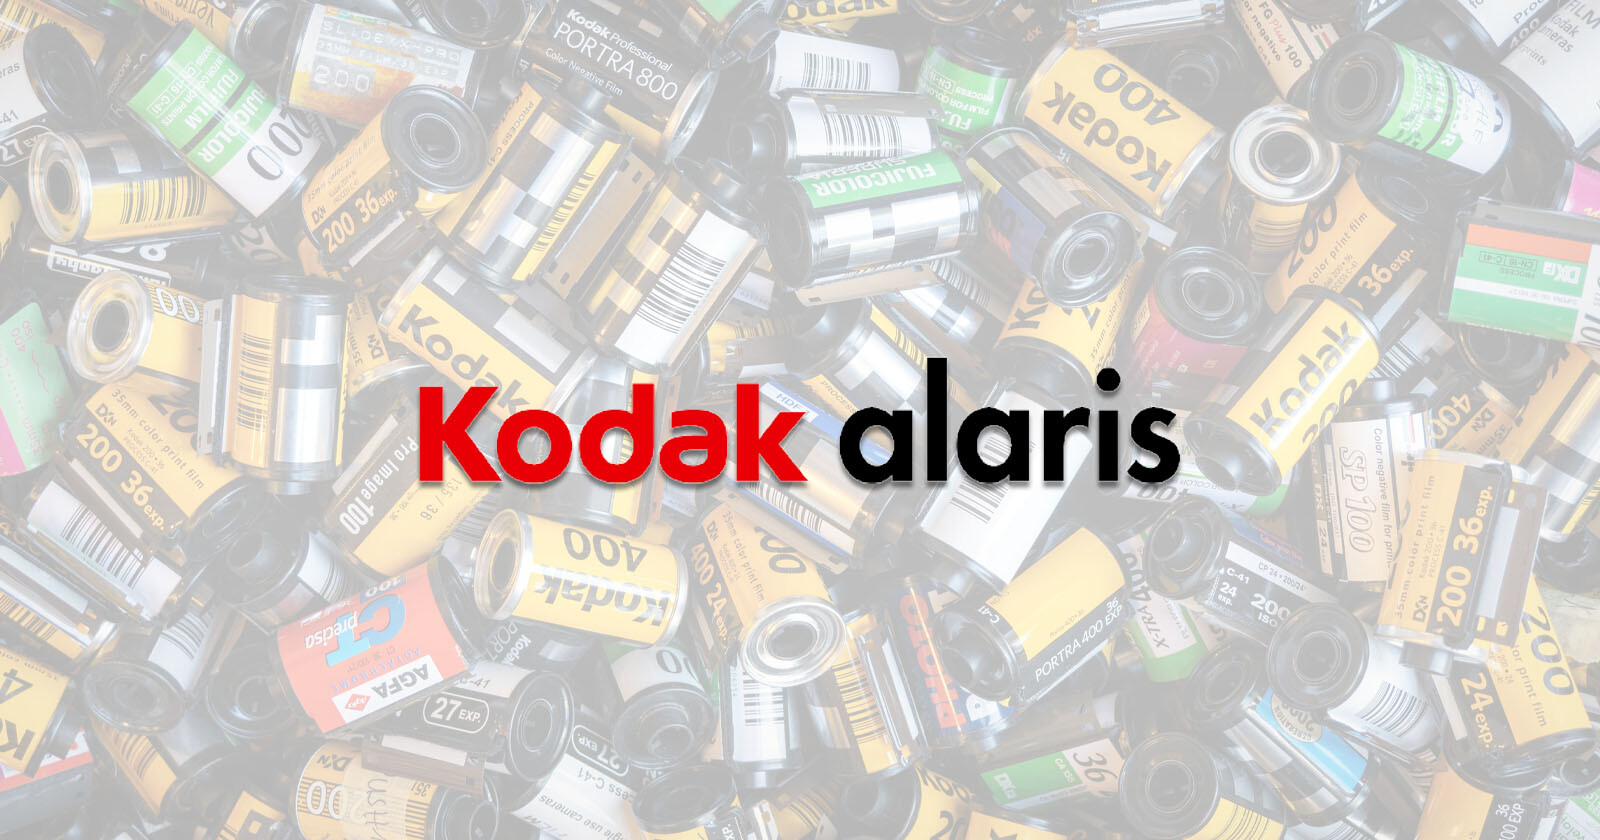 The Main Kodak Film Business is Up for Sale Again